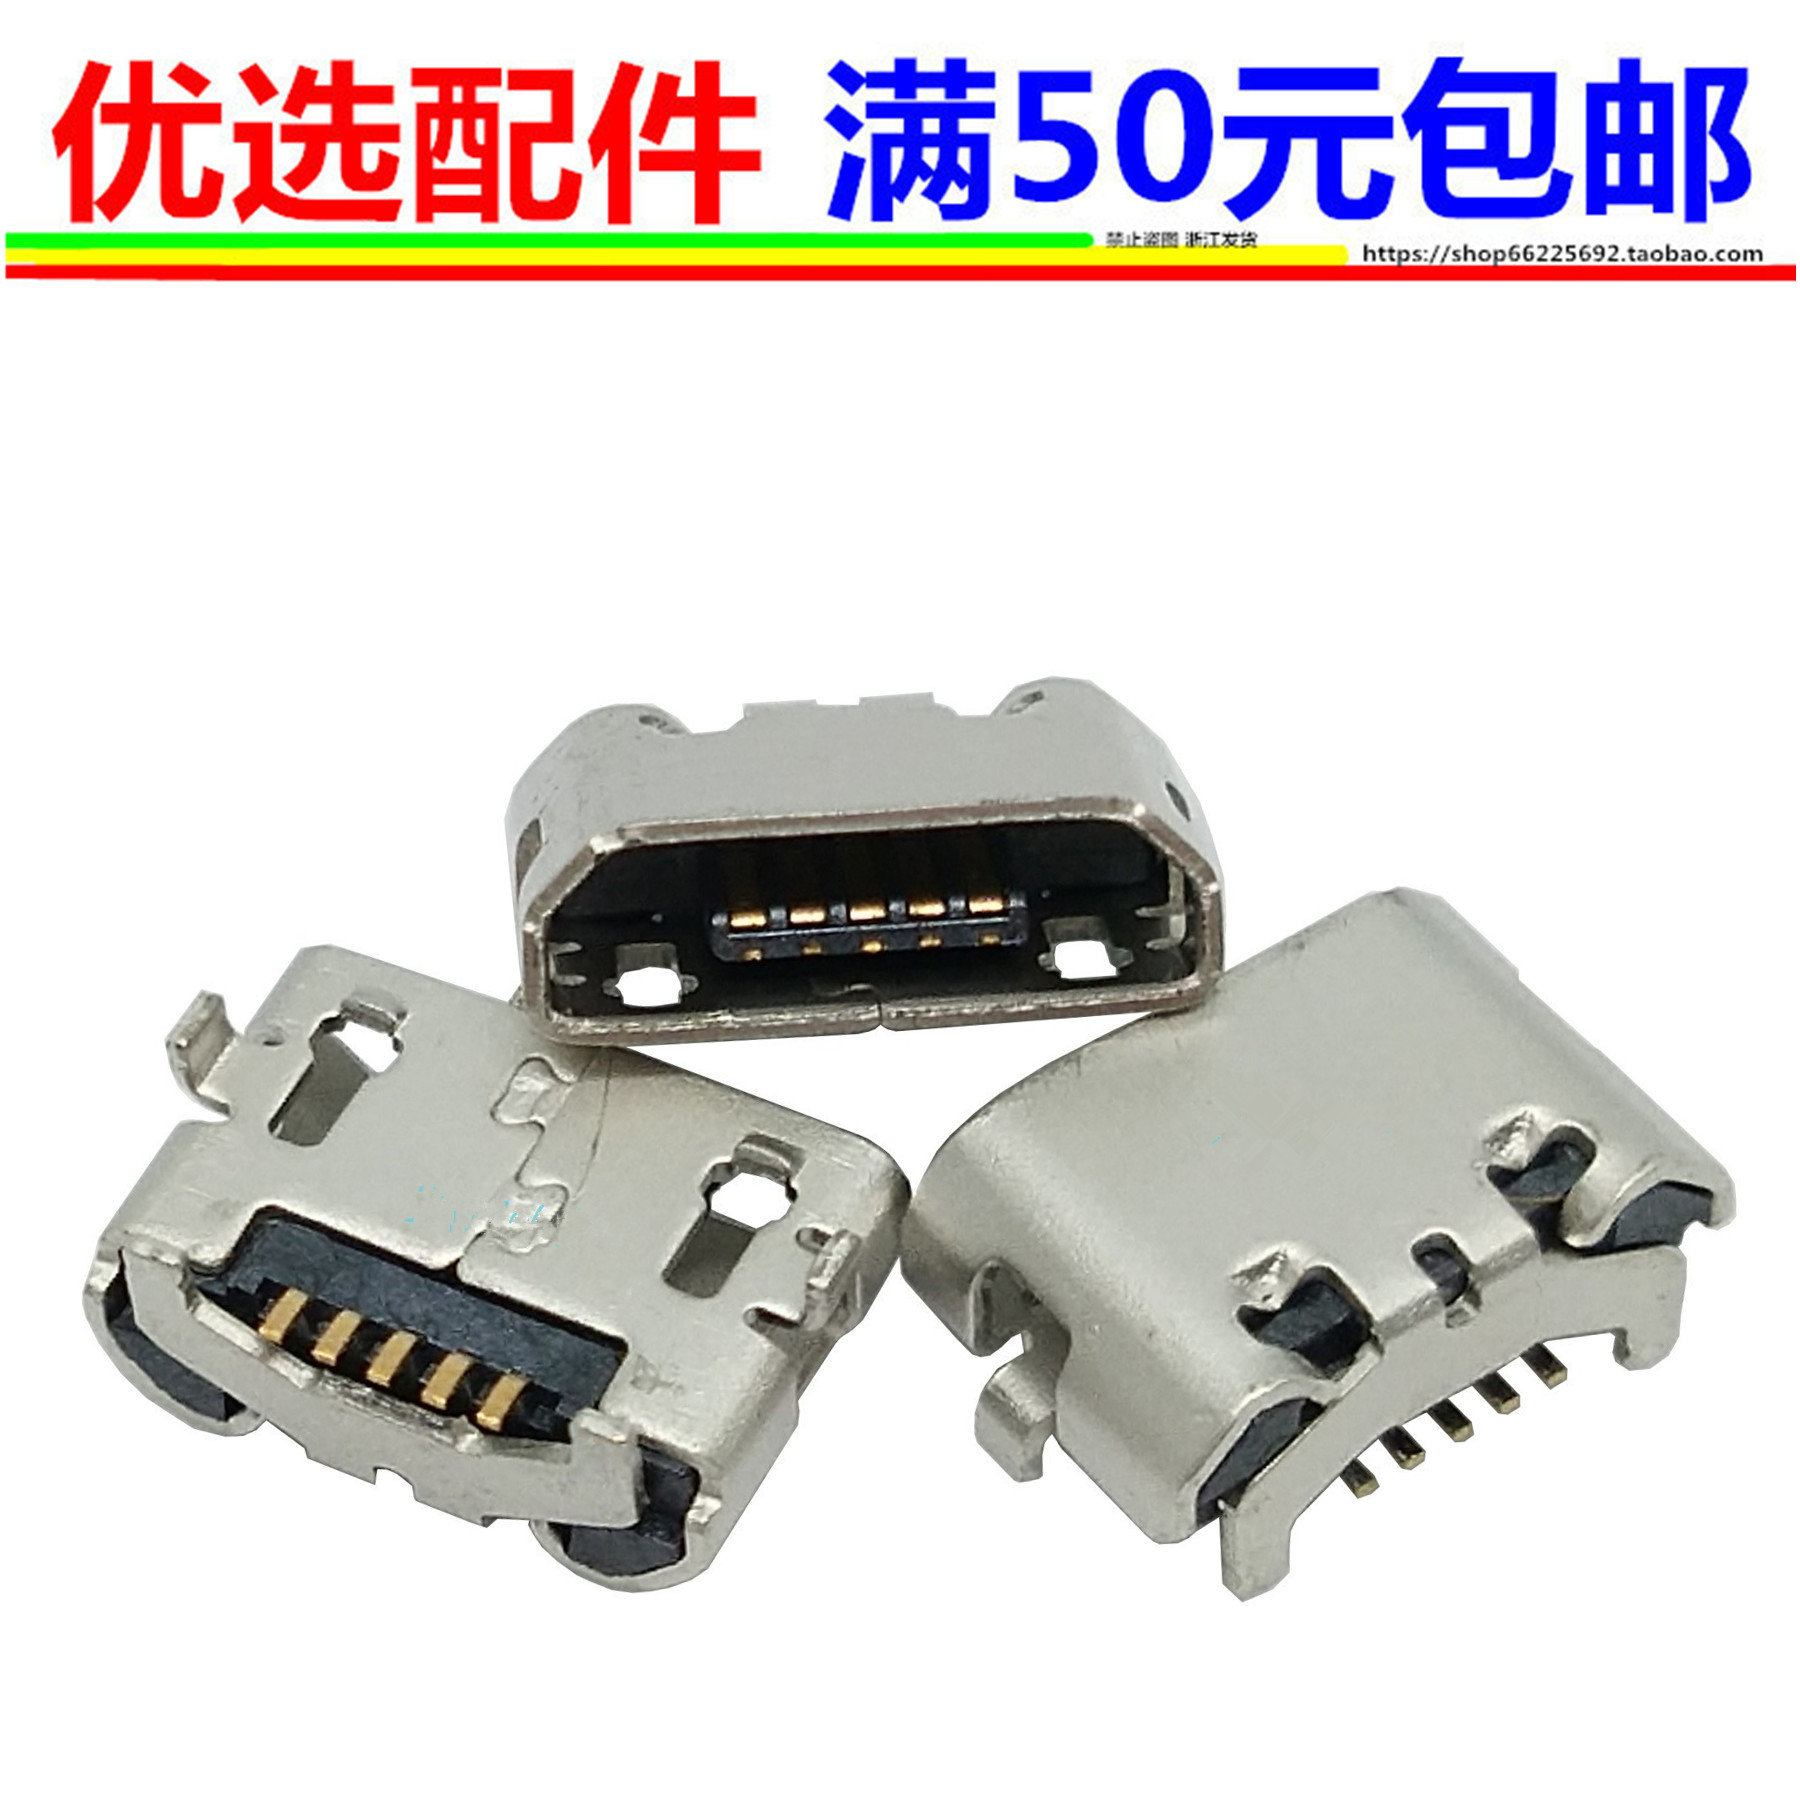 Apply Huawei mate8 Y550 Y550 G620S C8817E D brisk 5a tail plug charging connector